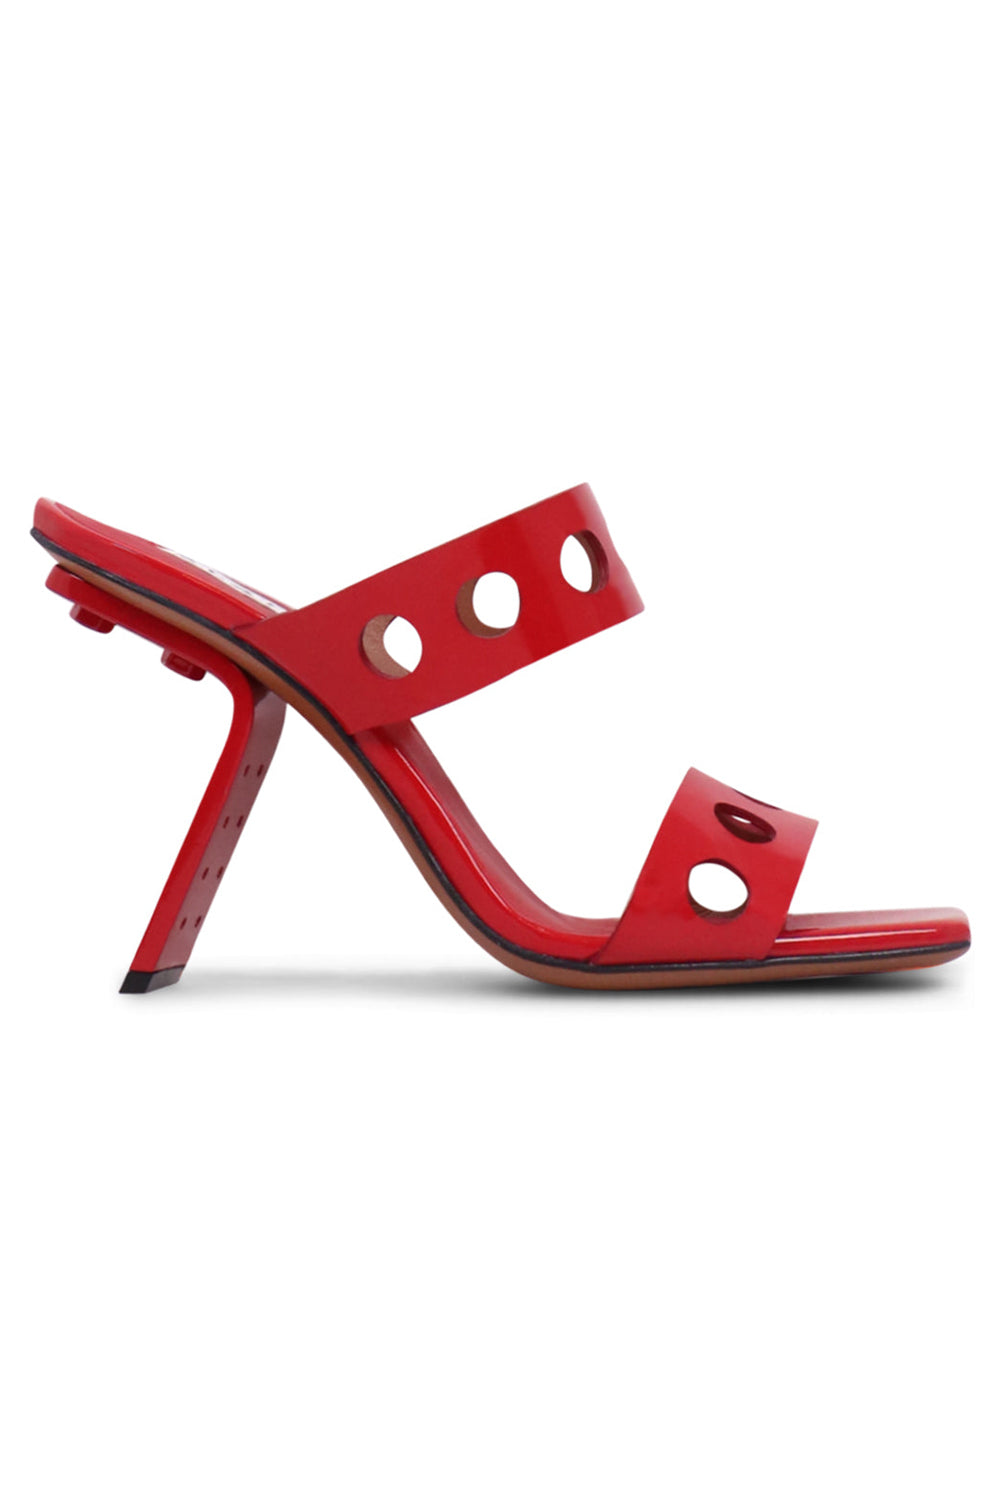 ALAIA SHOES PERFORATED MULE 100MM | RED